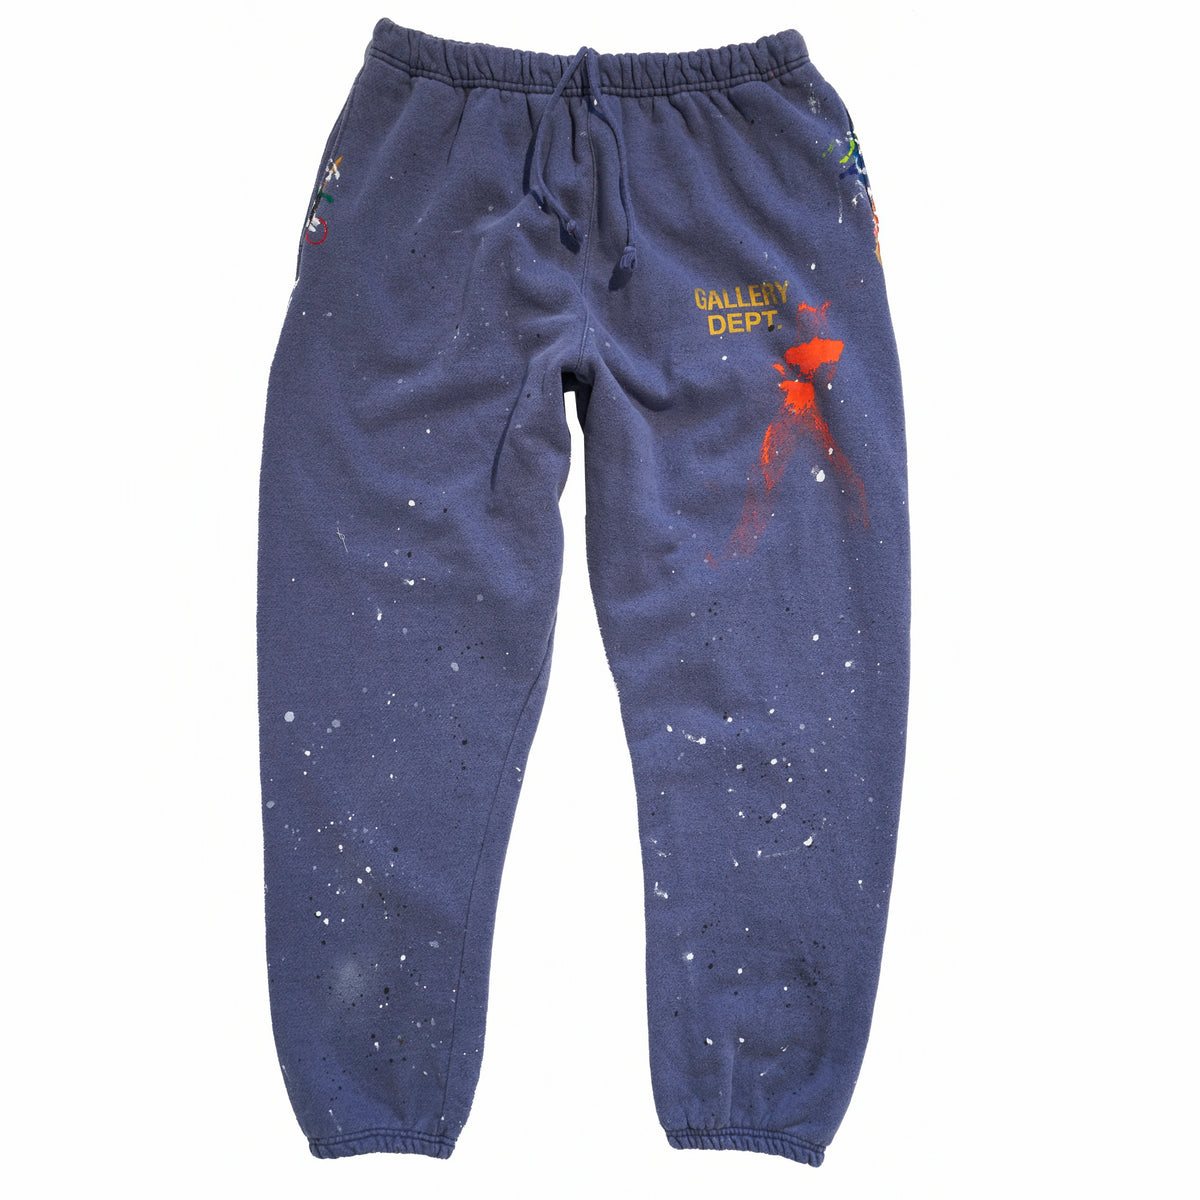 Gallery Dept. Hand Painted Logo Sweat Pant